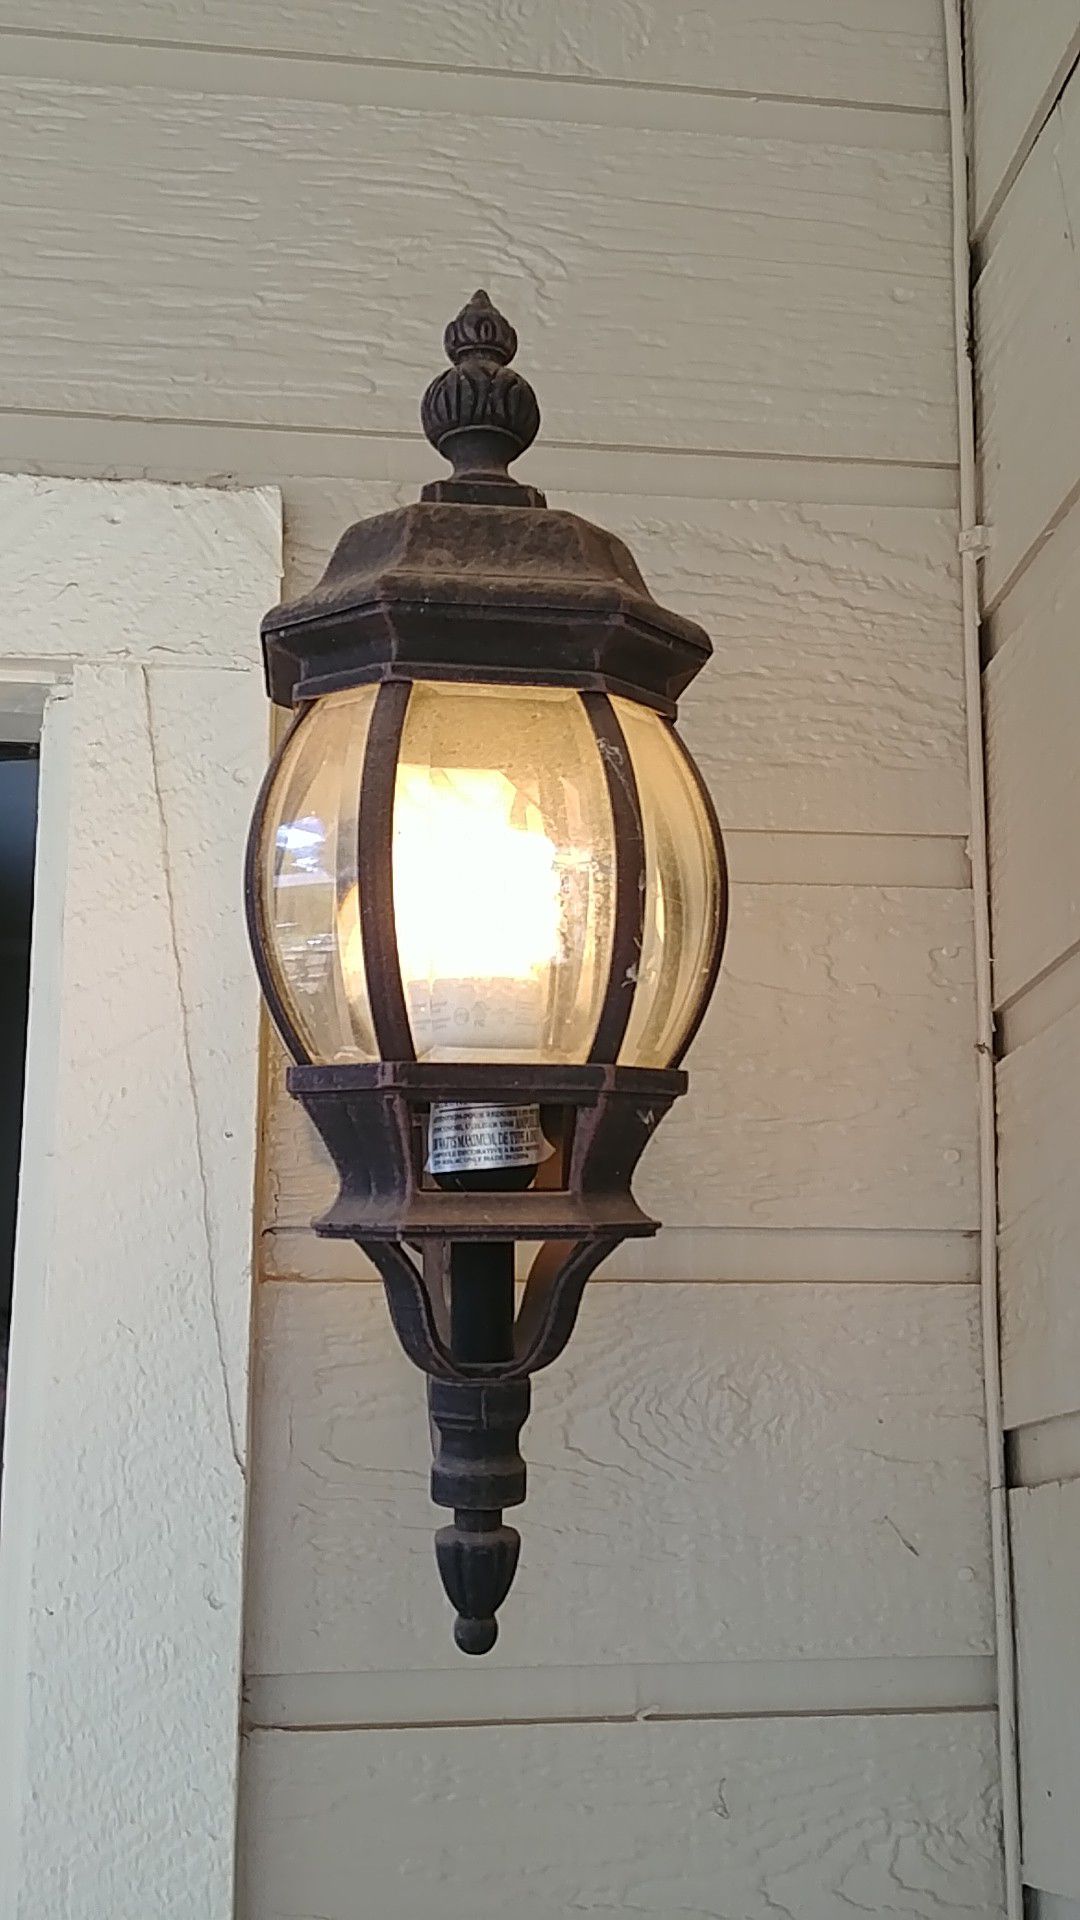 Outdoor porch light works great